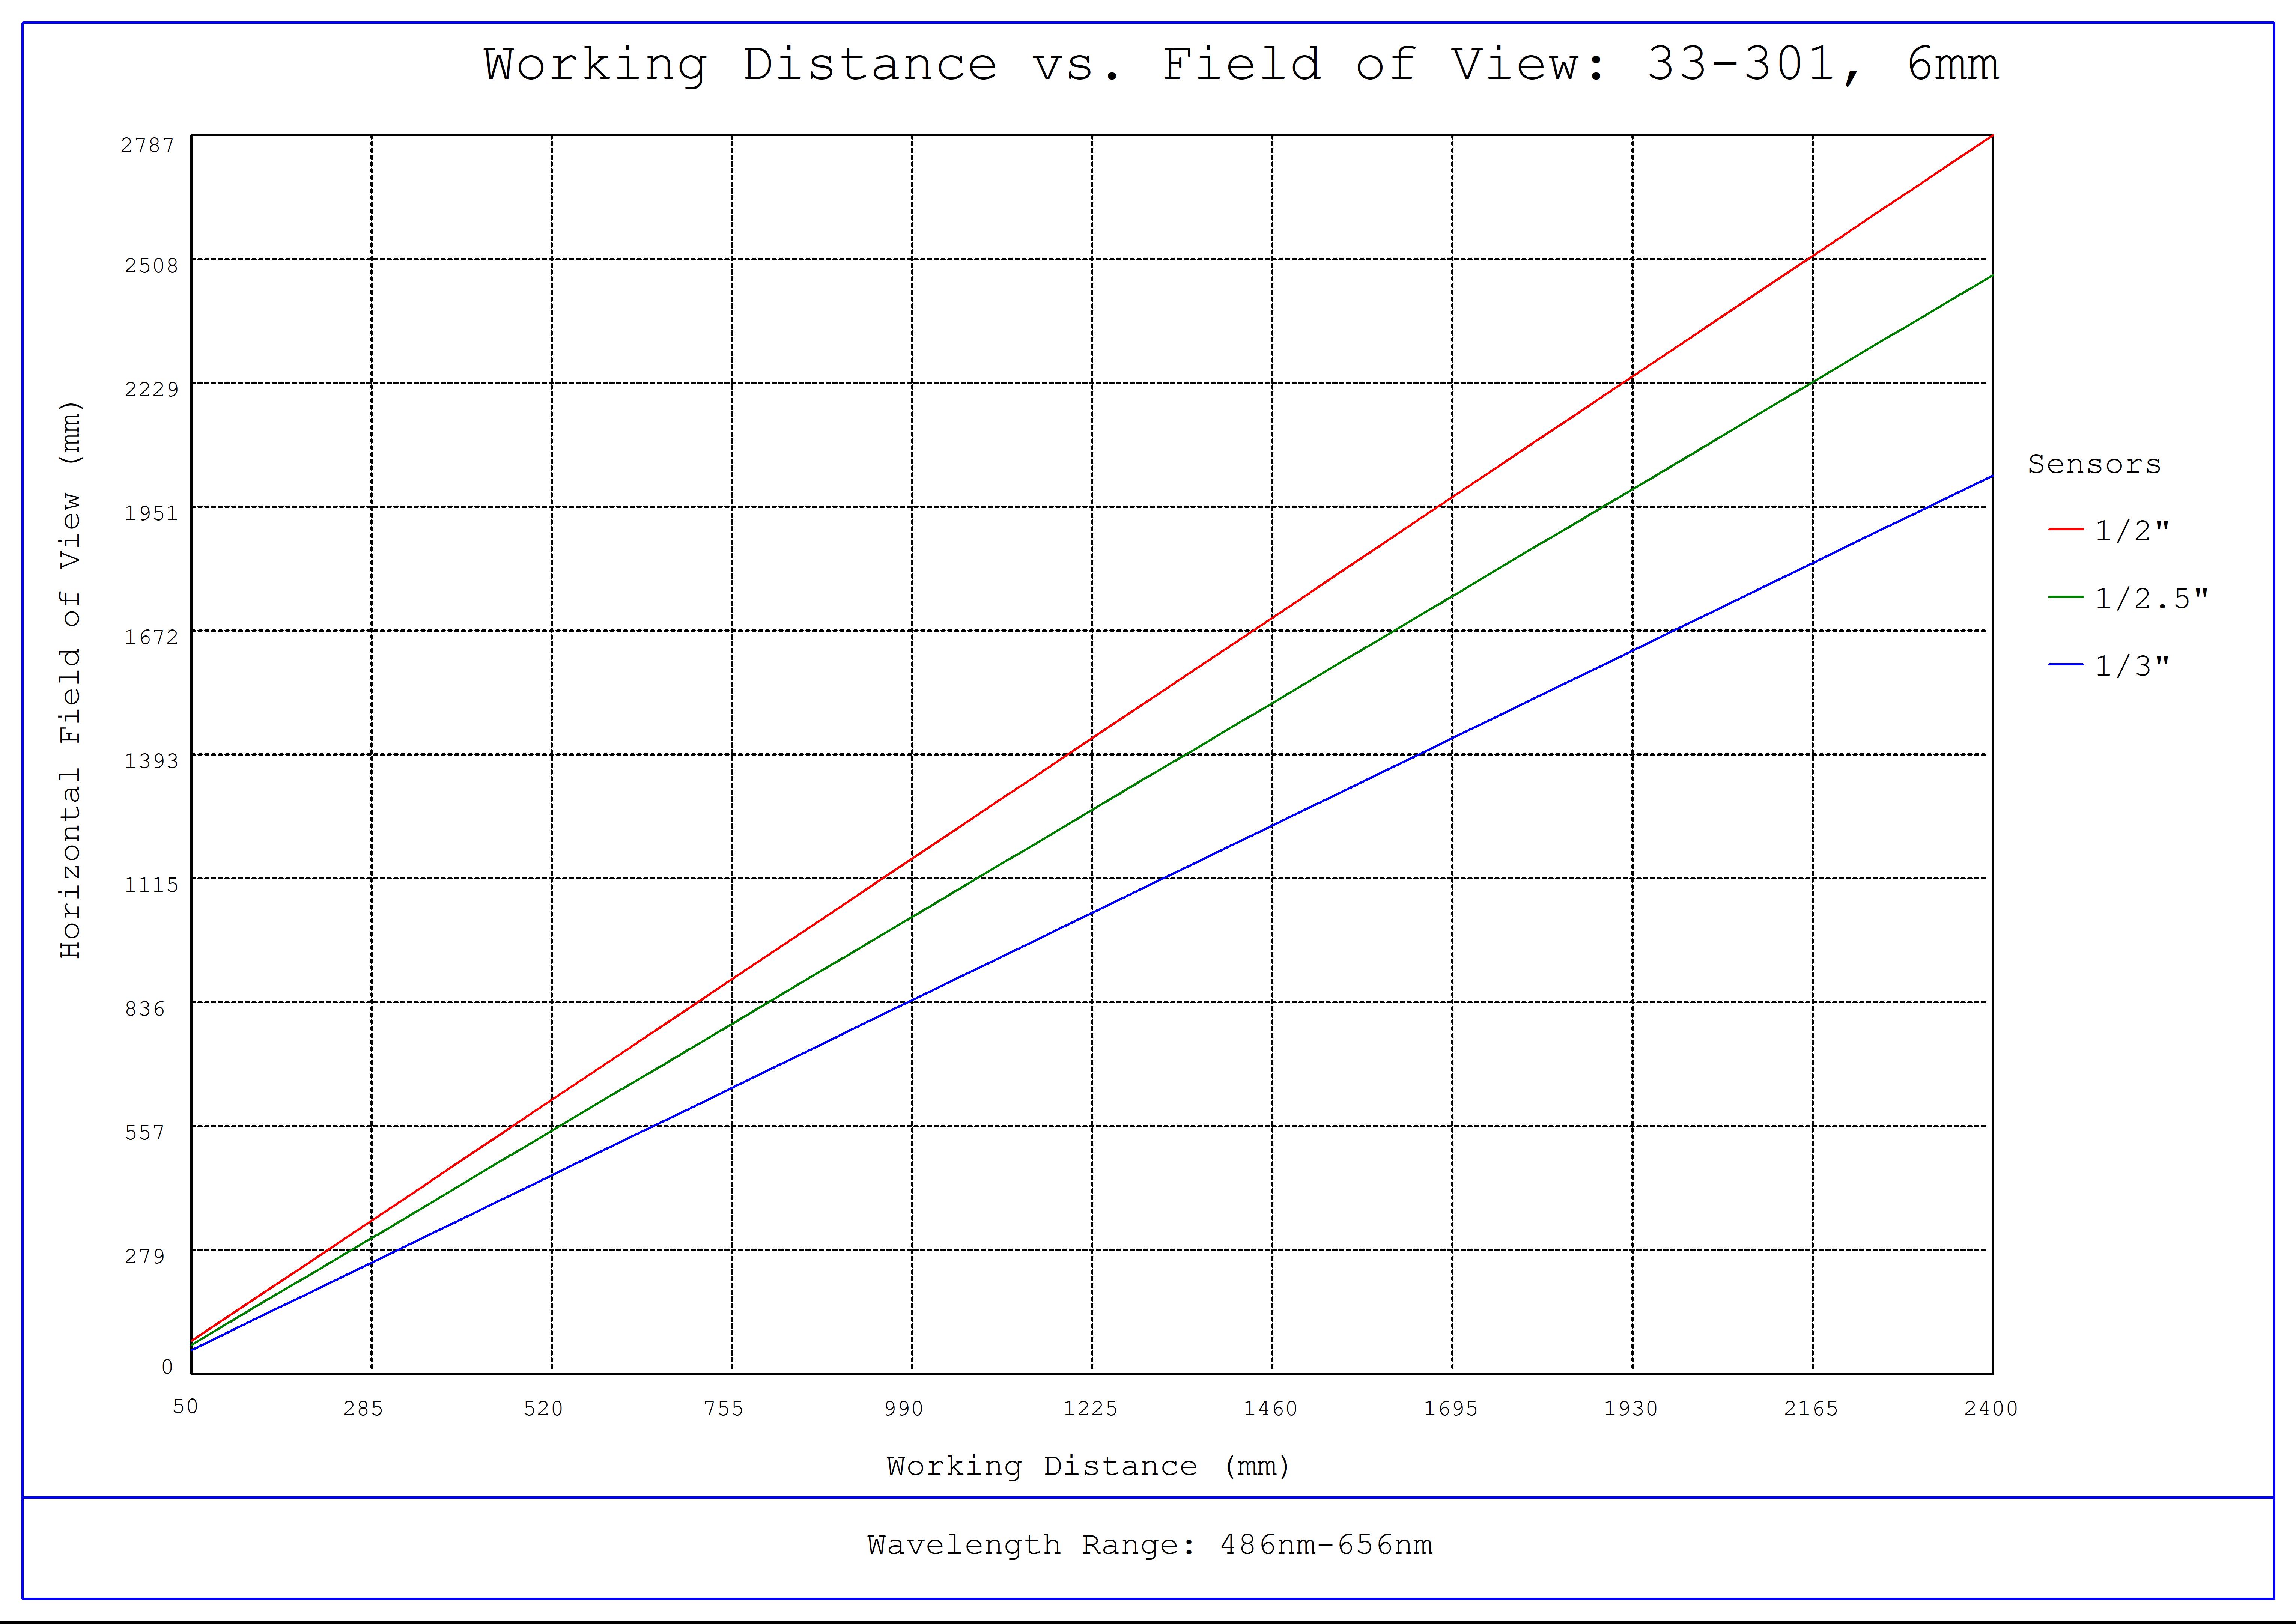 #33-301, 6mm UC Series Fixed Focal Length Lens, Working Distance versus Field of View Plot